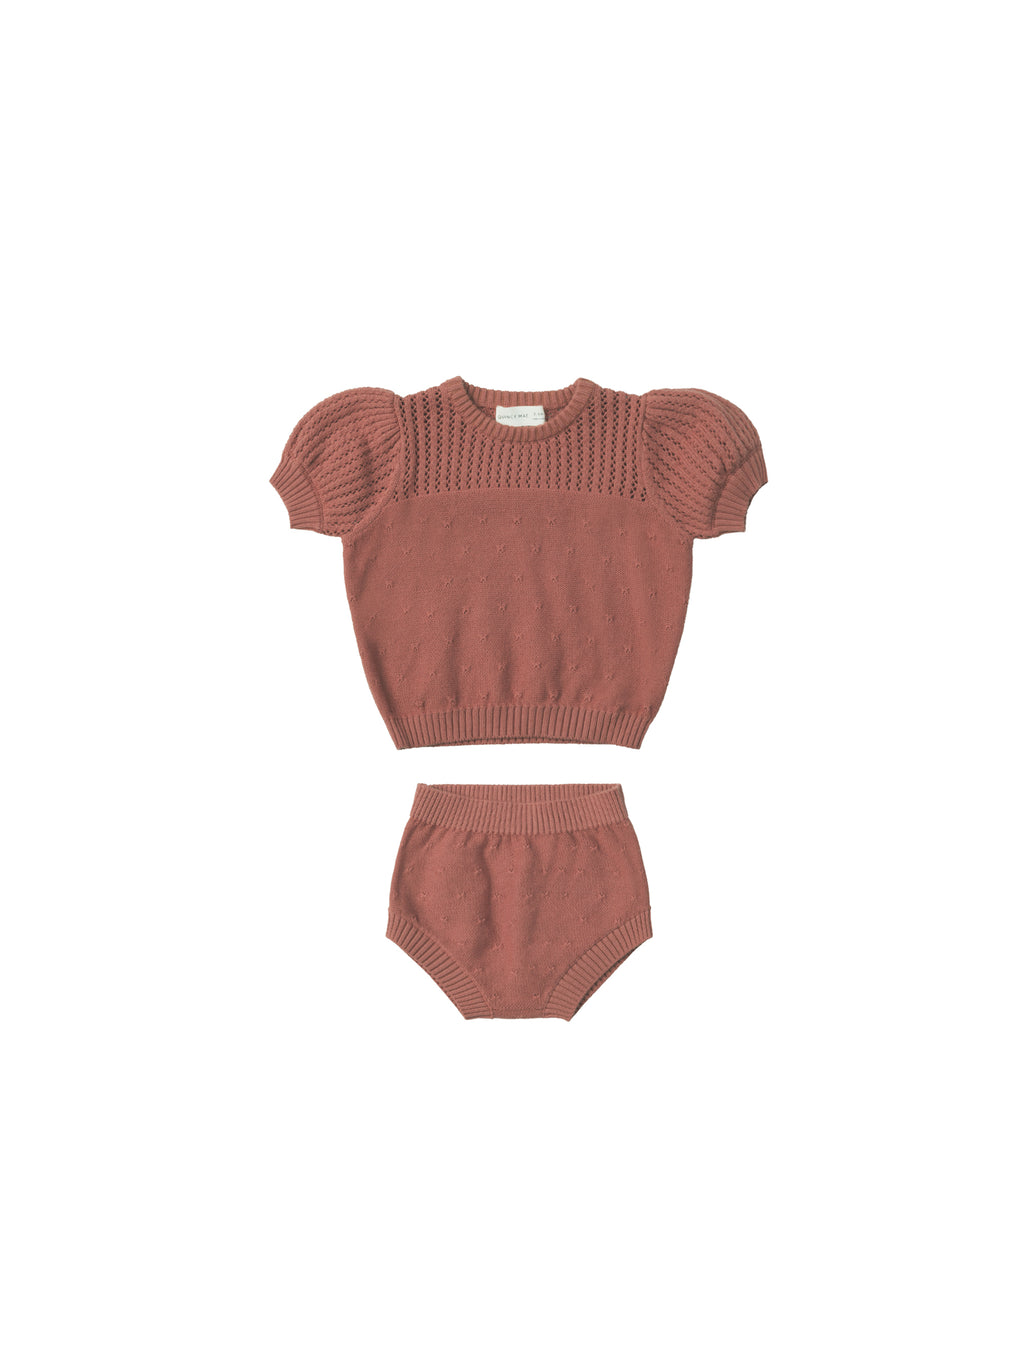 Quincy Mae Pointelle Knit Set - Berry